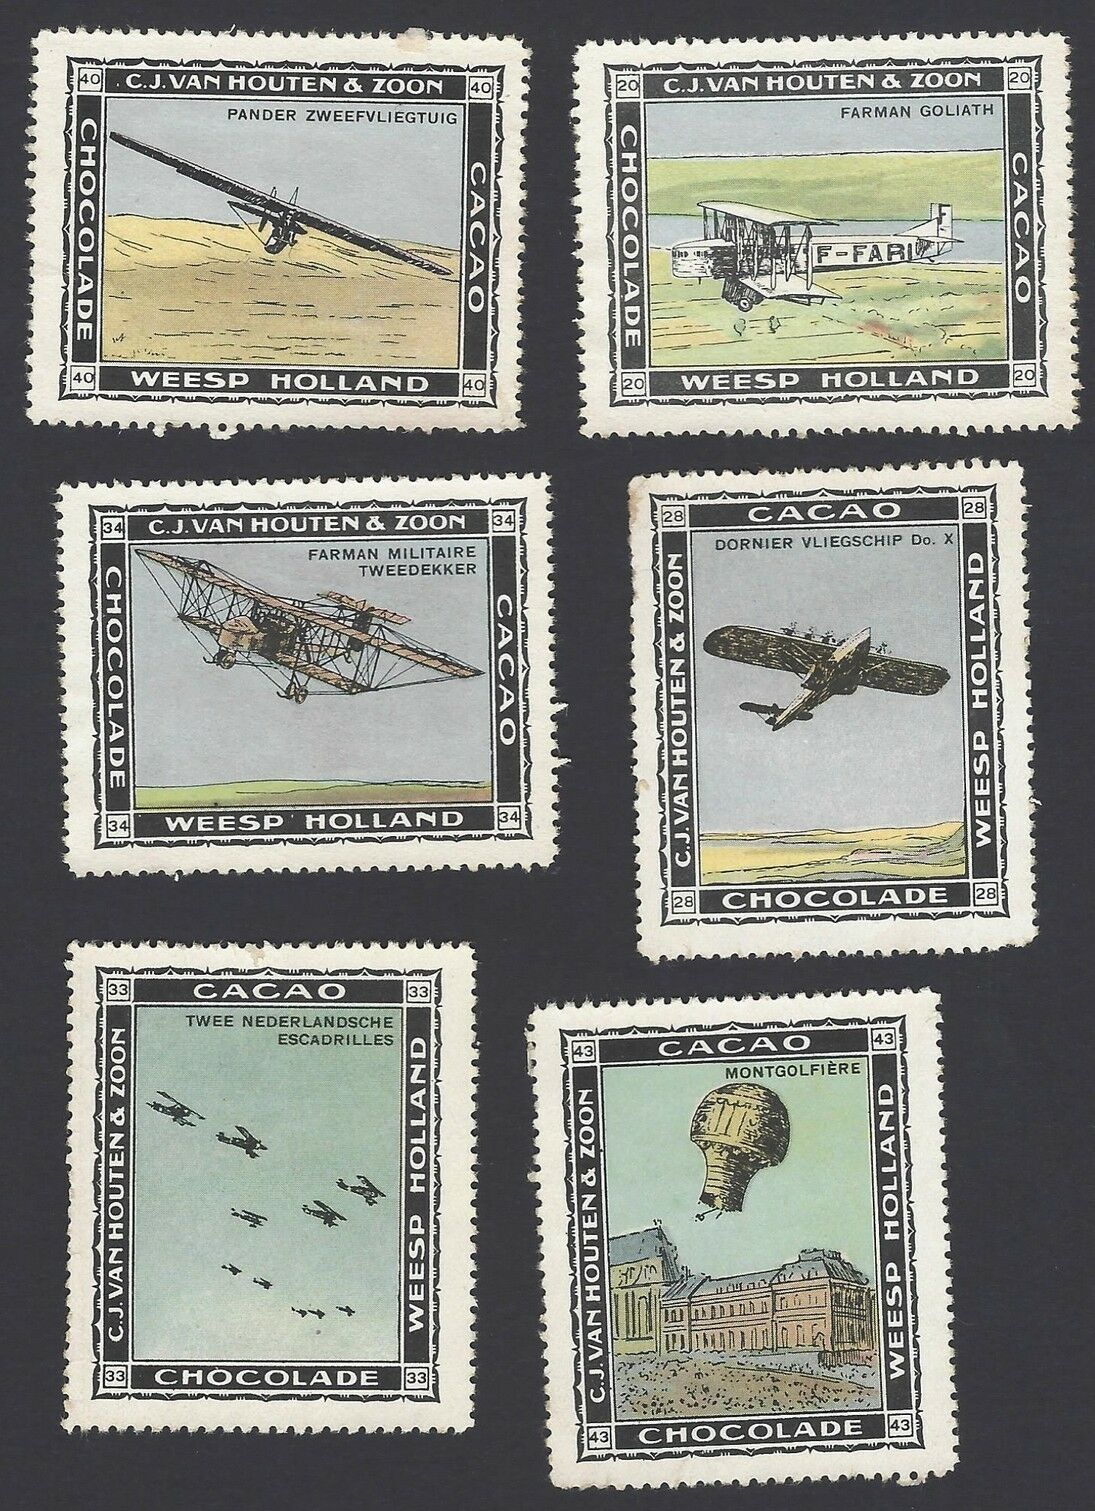 Van Houten & Zoon Cacao and Chocolate poster stamps vintage Airplanes (6)